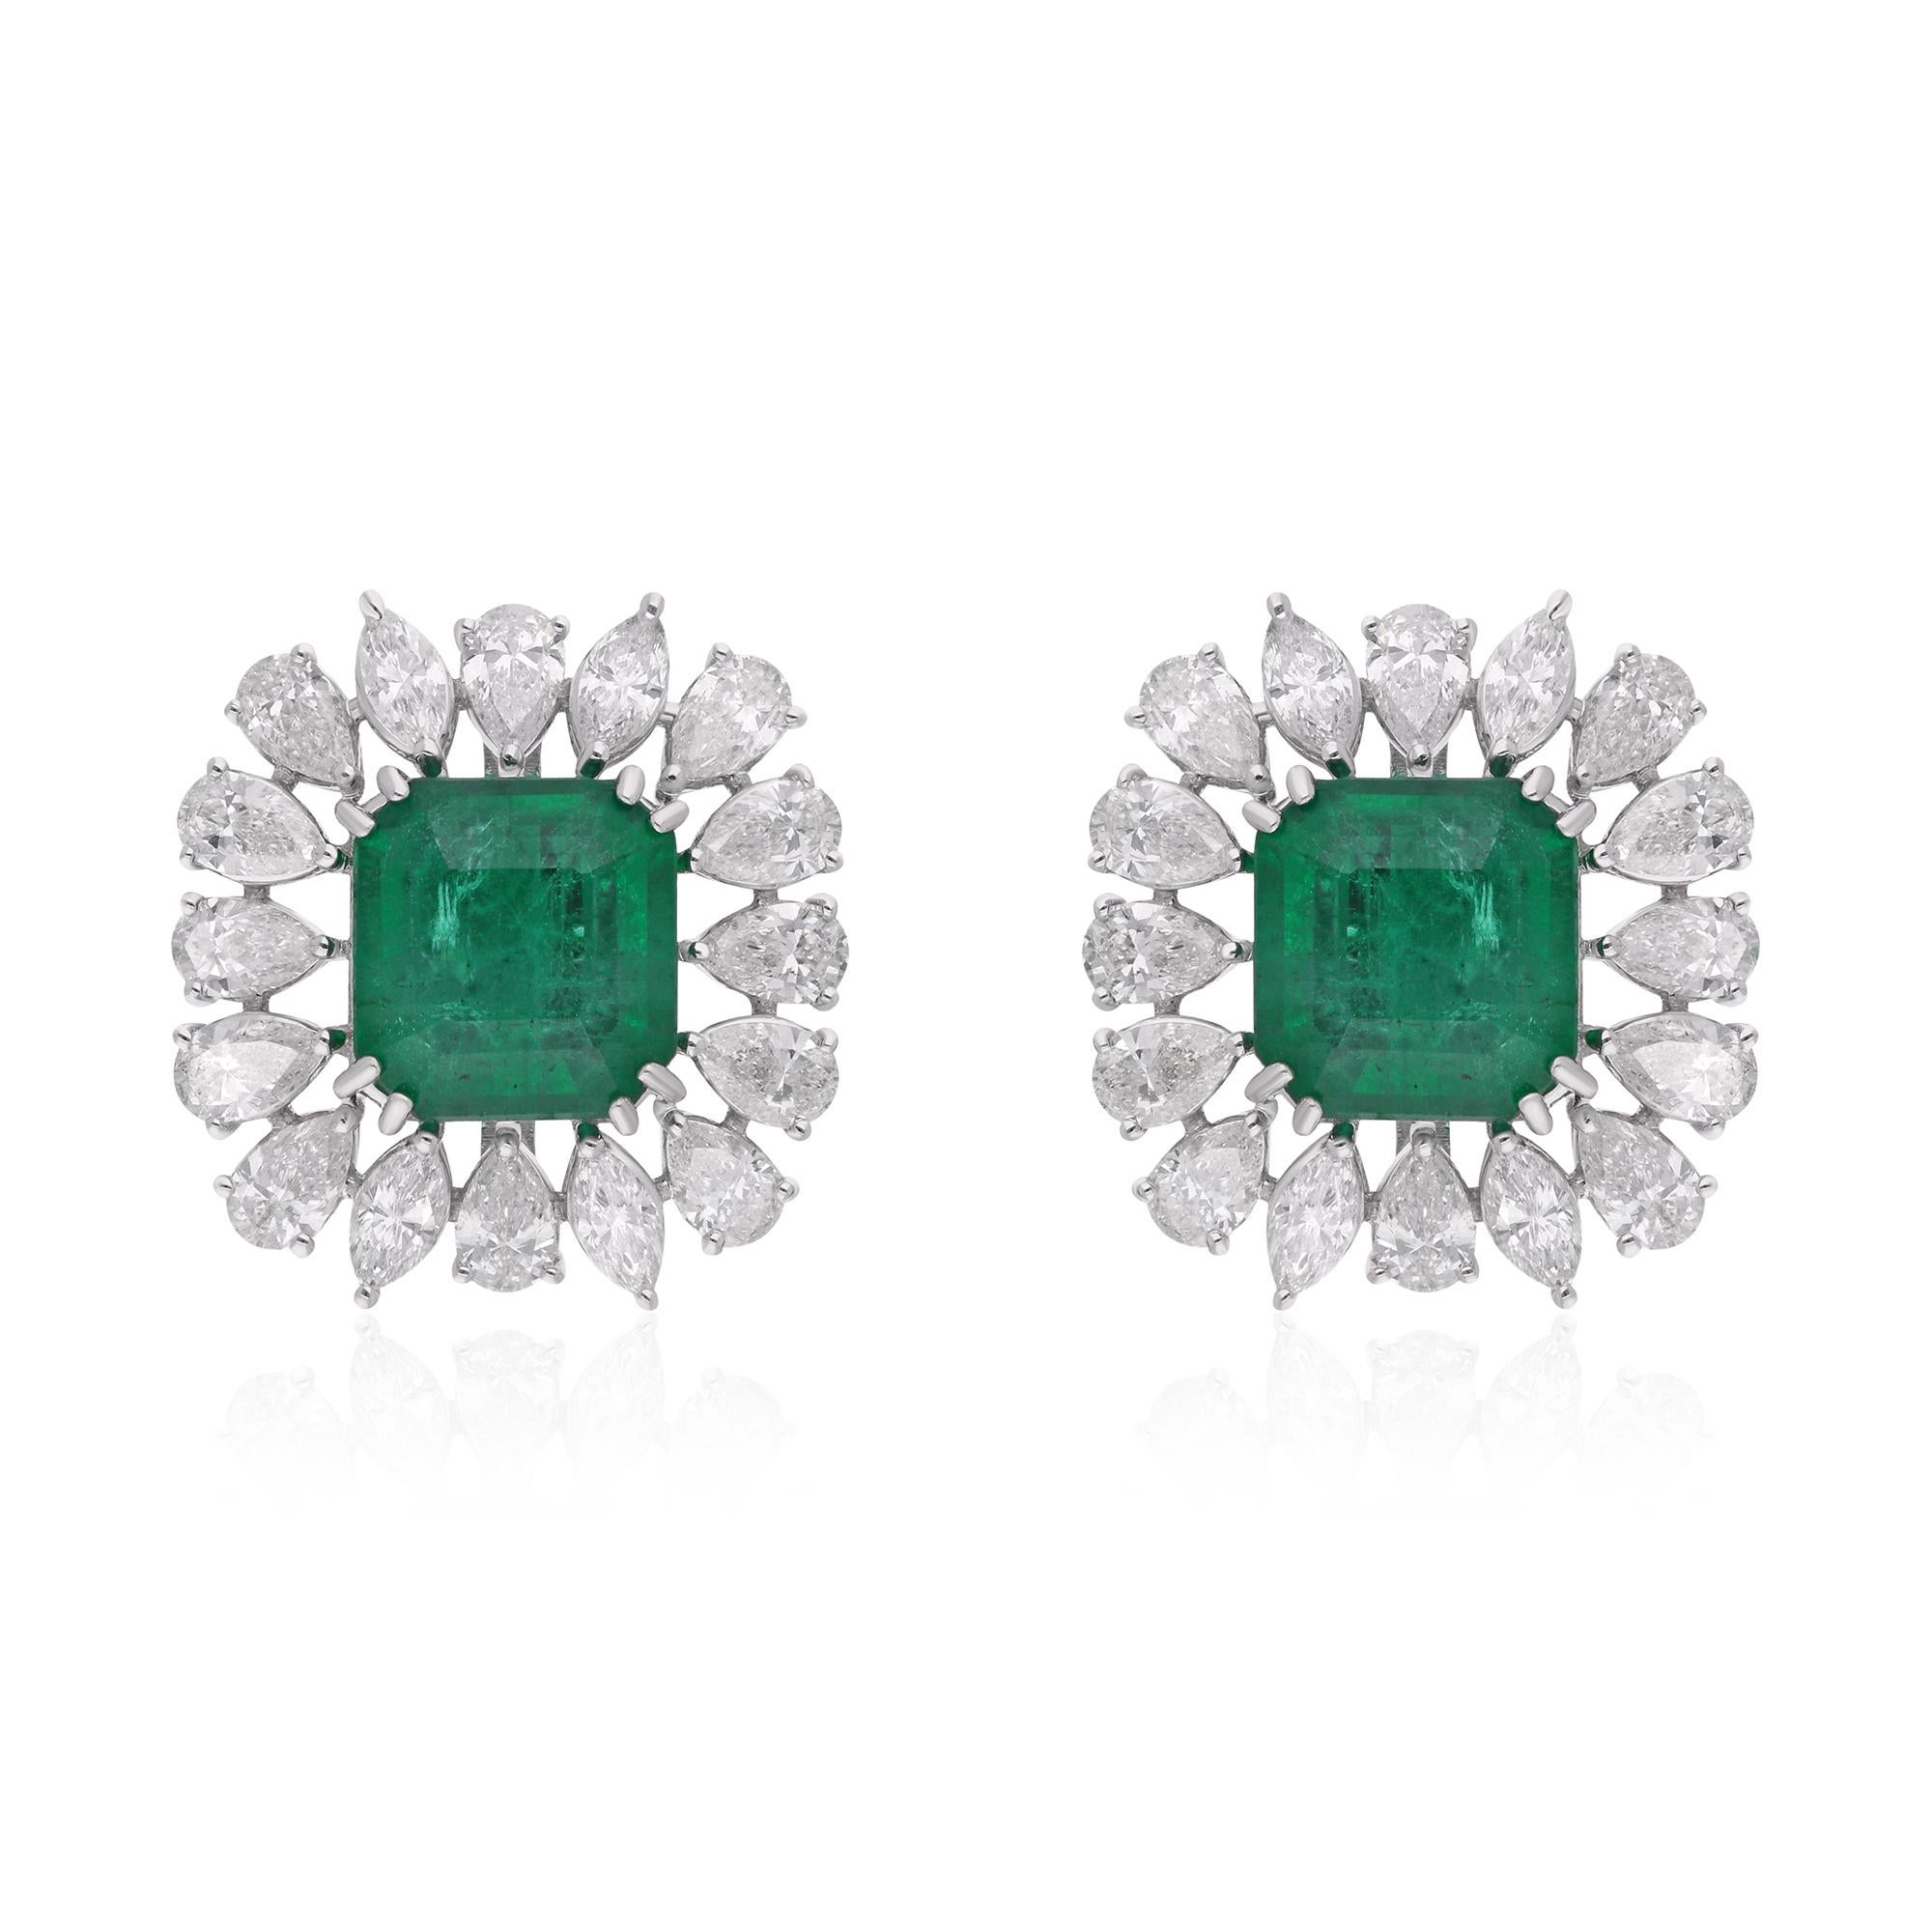 Crafted with precision and care, these stud earrings are a true work of art, designed to be cherished for a lifetime. The 14 karat white gold setting provides a luxurious backdrop for the gemstones and diamonds, enhancing their radiance with its